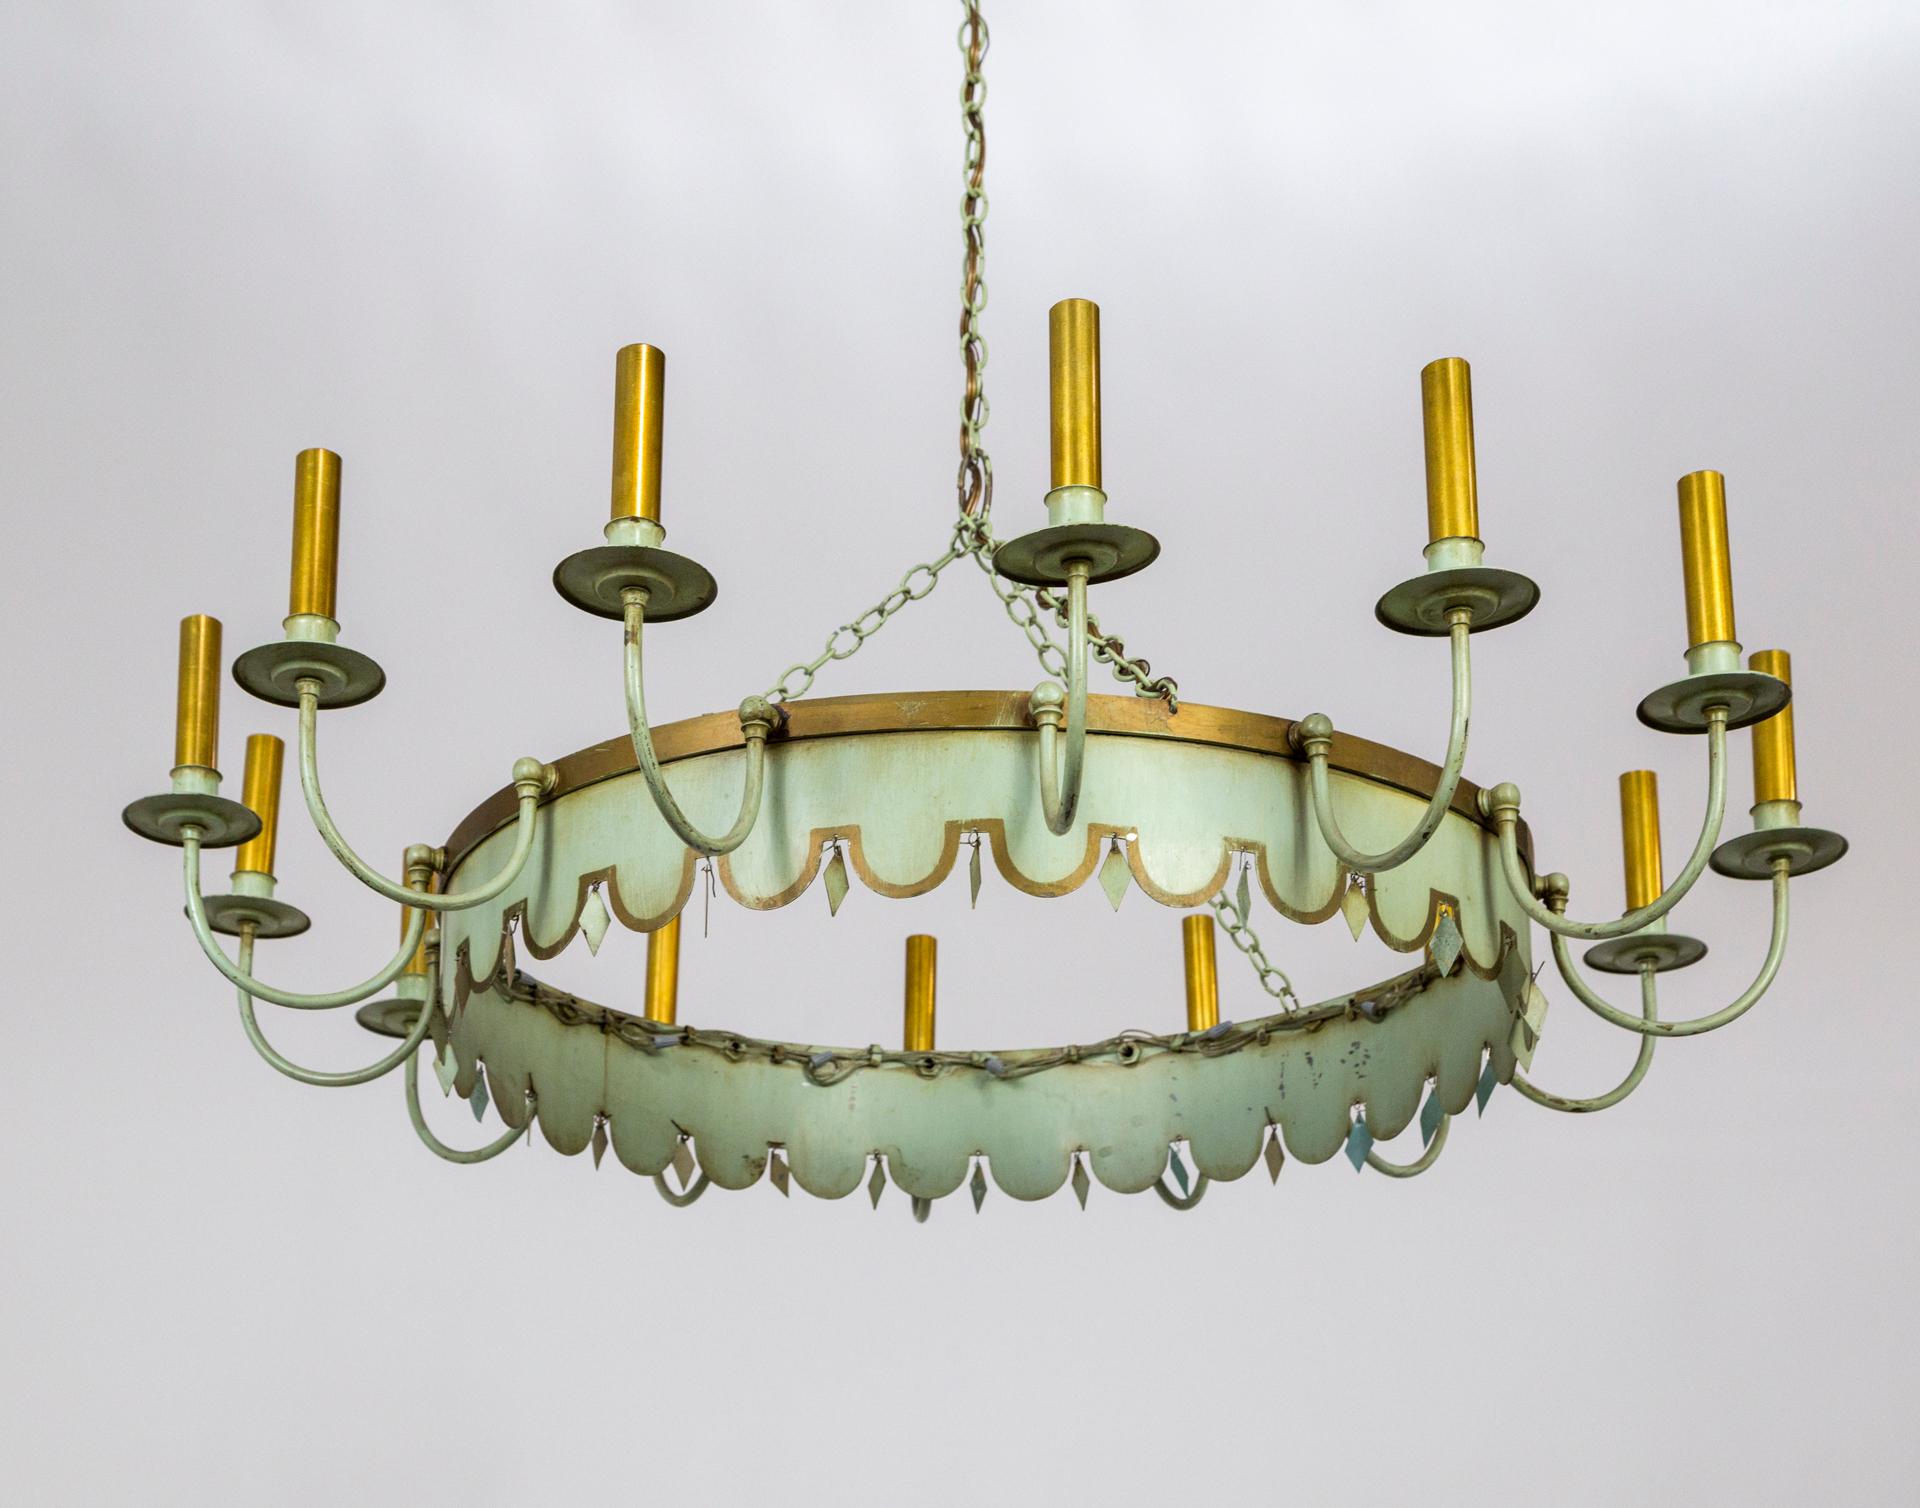 A large, French, ring-shaped, lacquered metal chandelier in a versatile, pale green hue with gold trim, made in the 1940s; with small, matching metal, diamond pieces hanging between scallops on the bottom edge, and 14 candlestick lights on delicate,